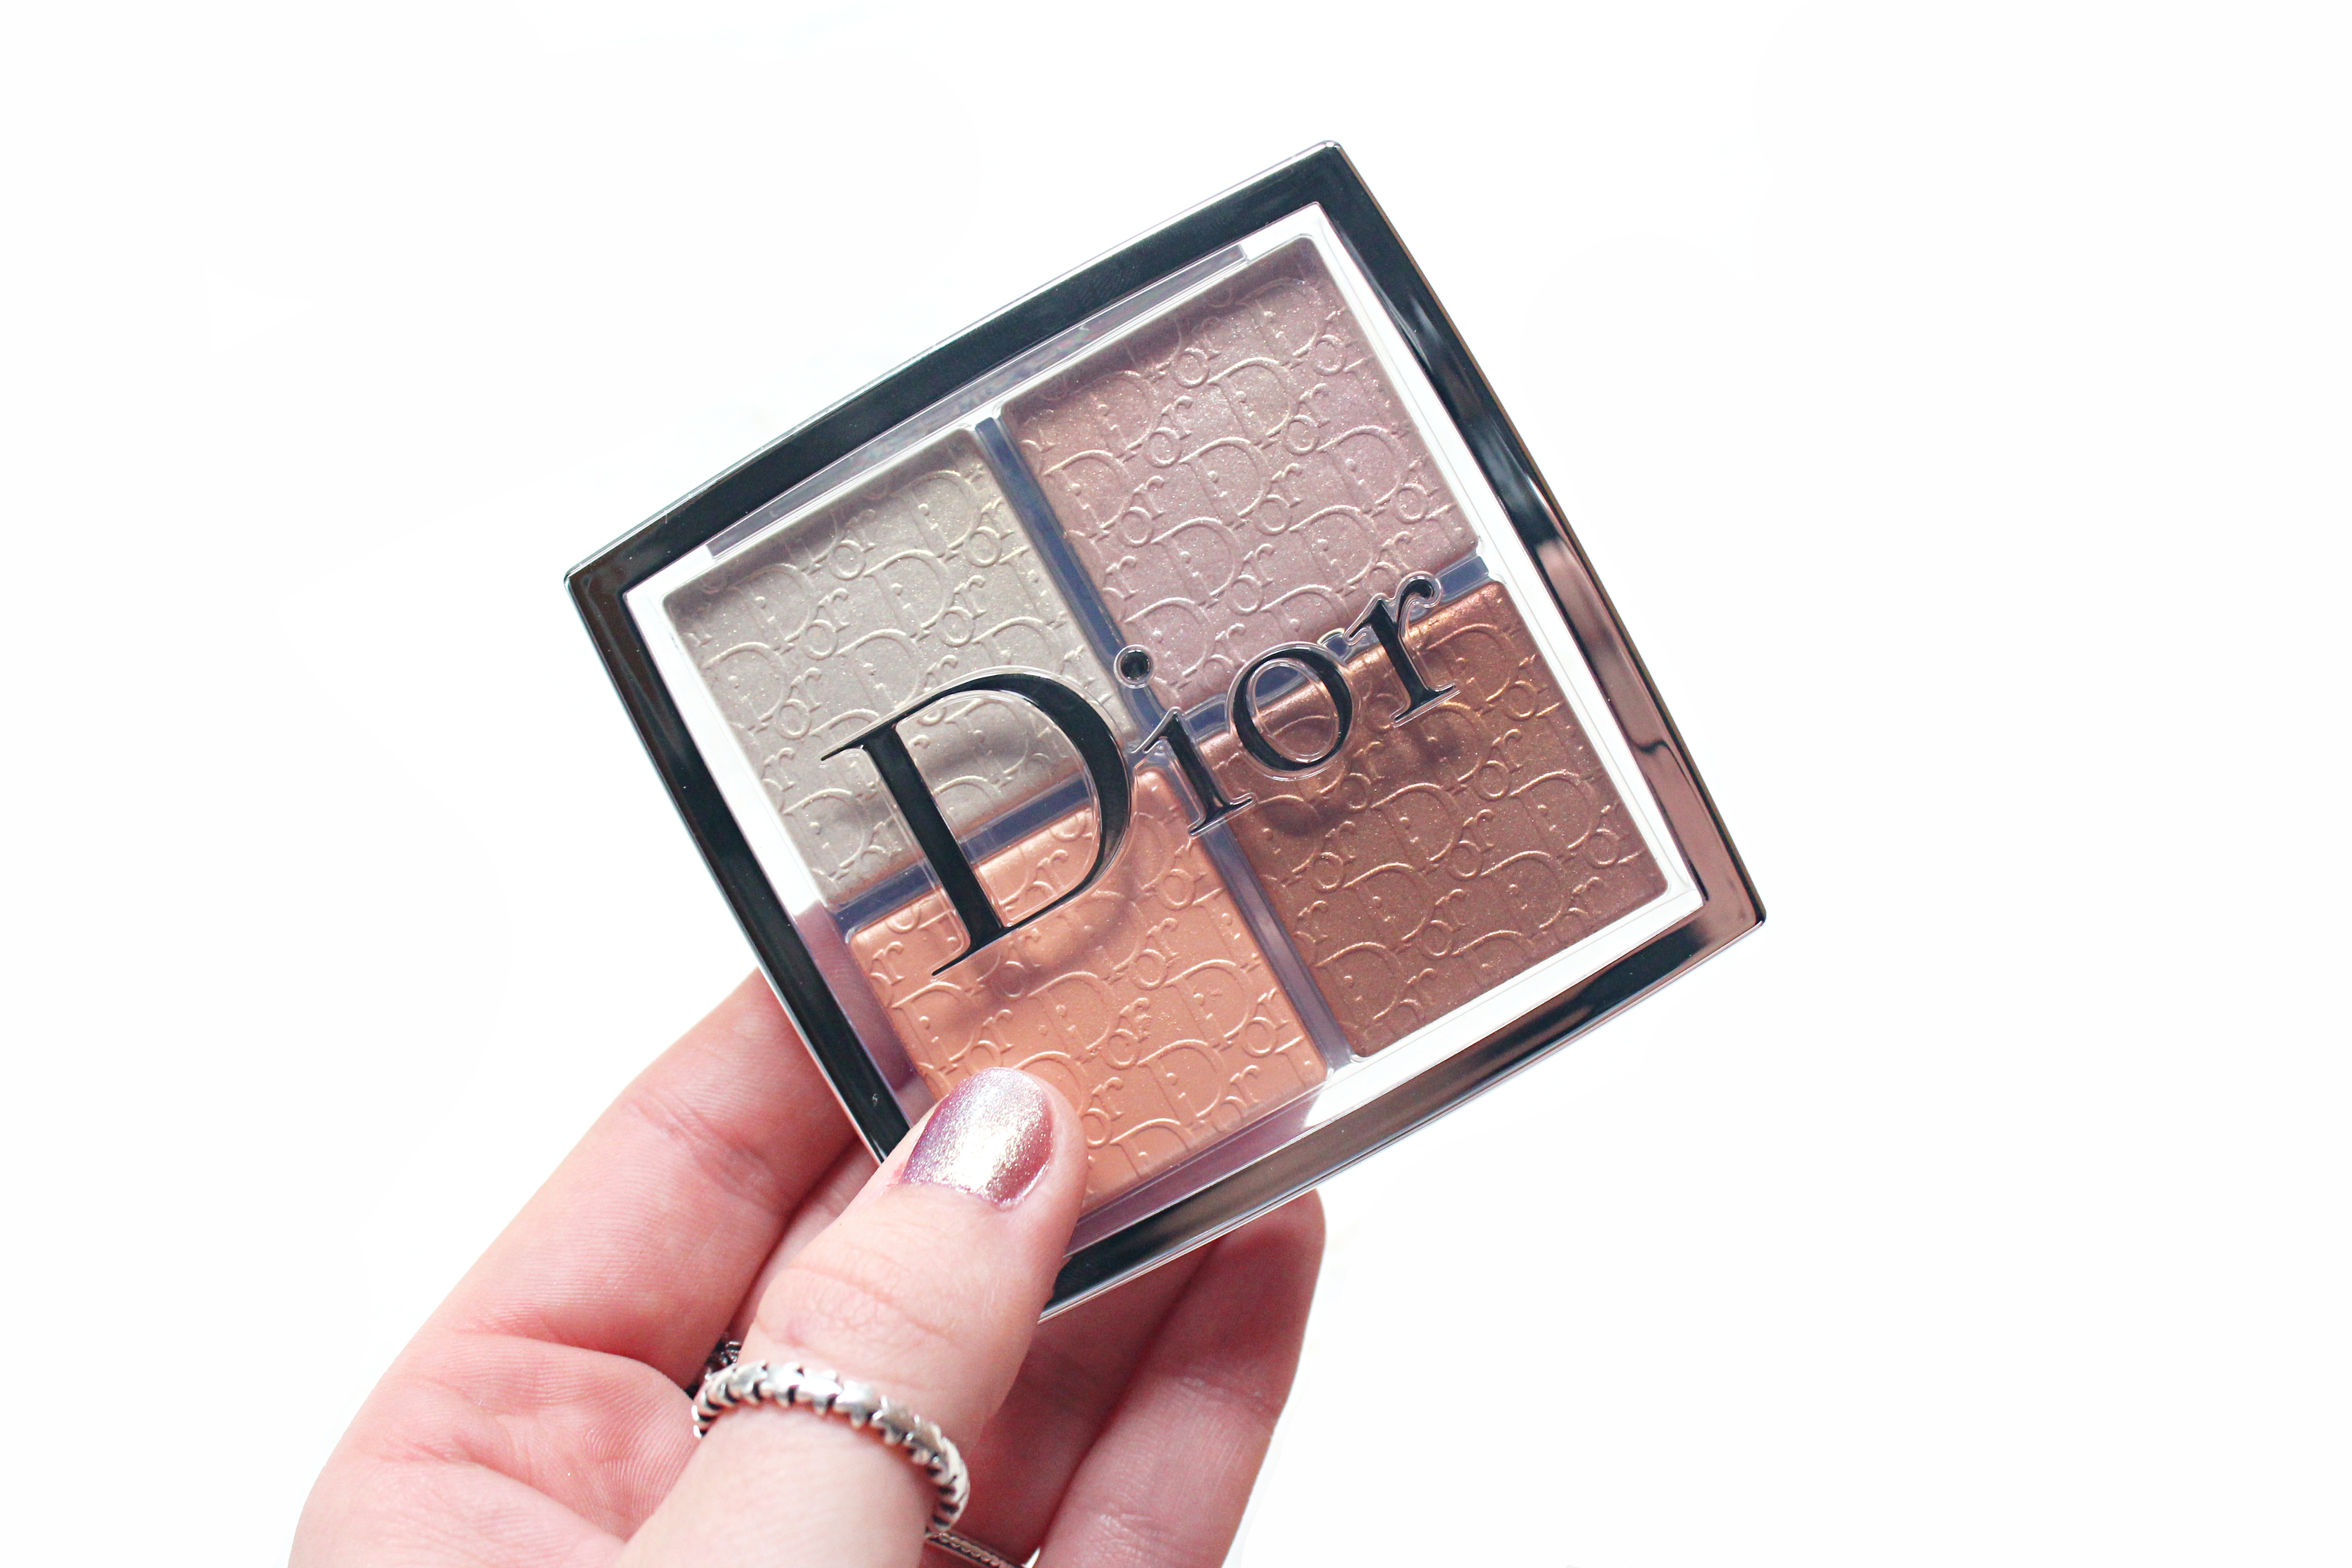 Dior Backstage 002 Glitz Glow Face Palette Review & Swatches